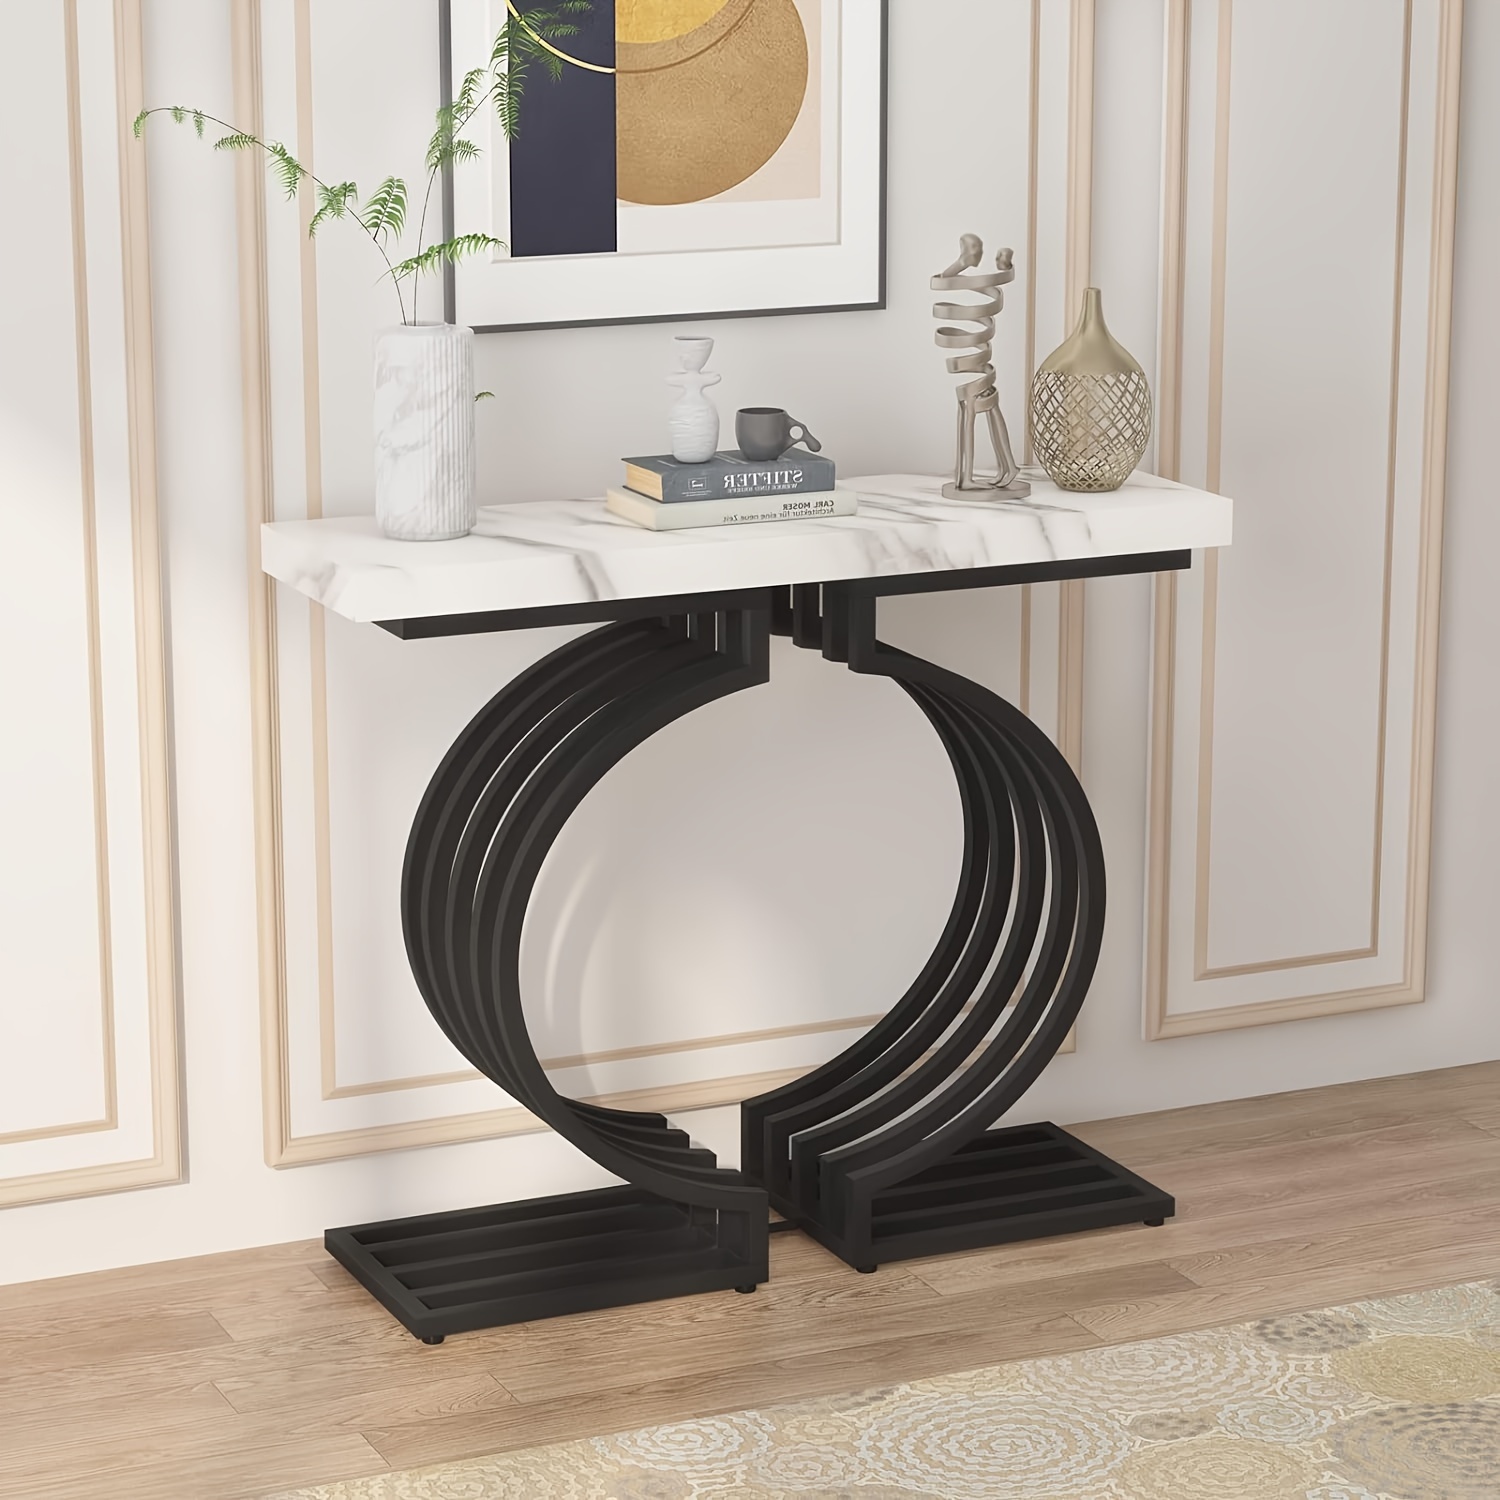 

40 Inch Entryway Table With Faux Marble Tabletop, Modern Console/accent Table With Geometric Legs And Black Base, Suitable For Living Room Hallway